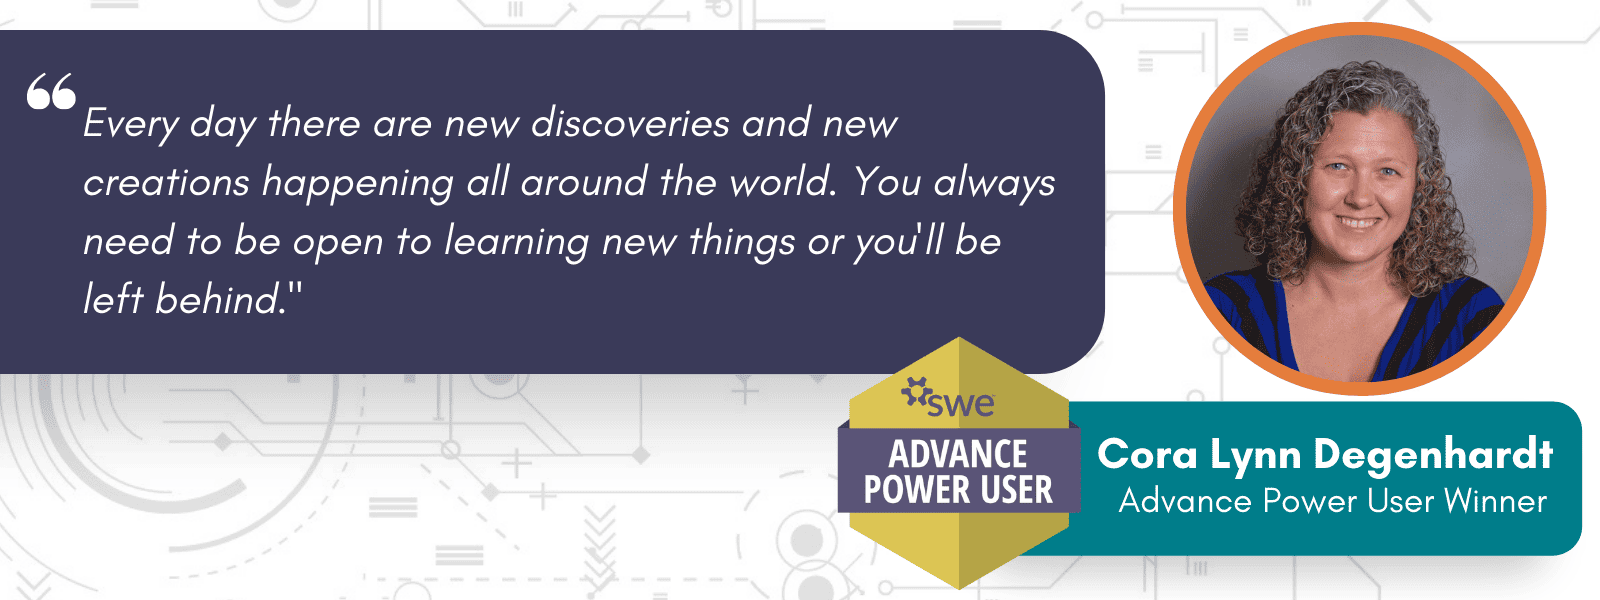 Advance Power User Badge and this quarter's winner, Cora Lynn Degenhardt, with a quote: "Every day there are new discoveries and new creations happening all around the world. You always need to be open to learning new things or you'll be left behind."